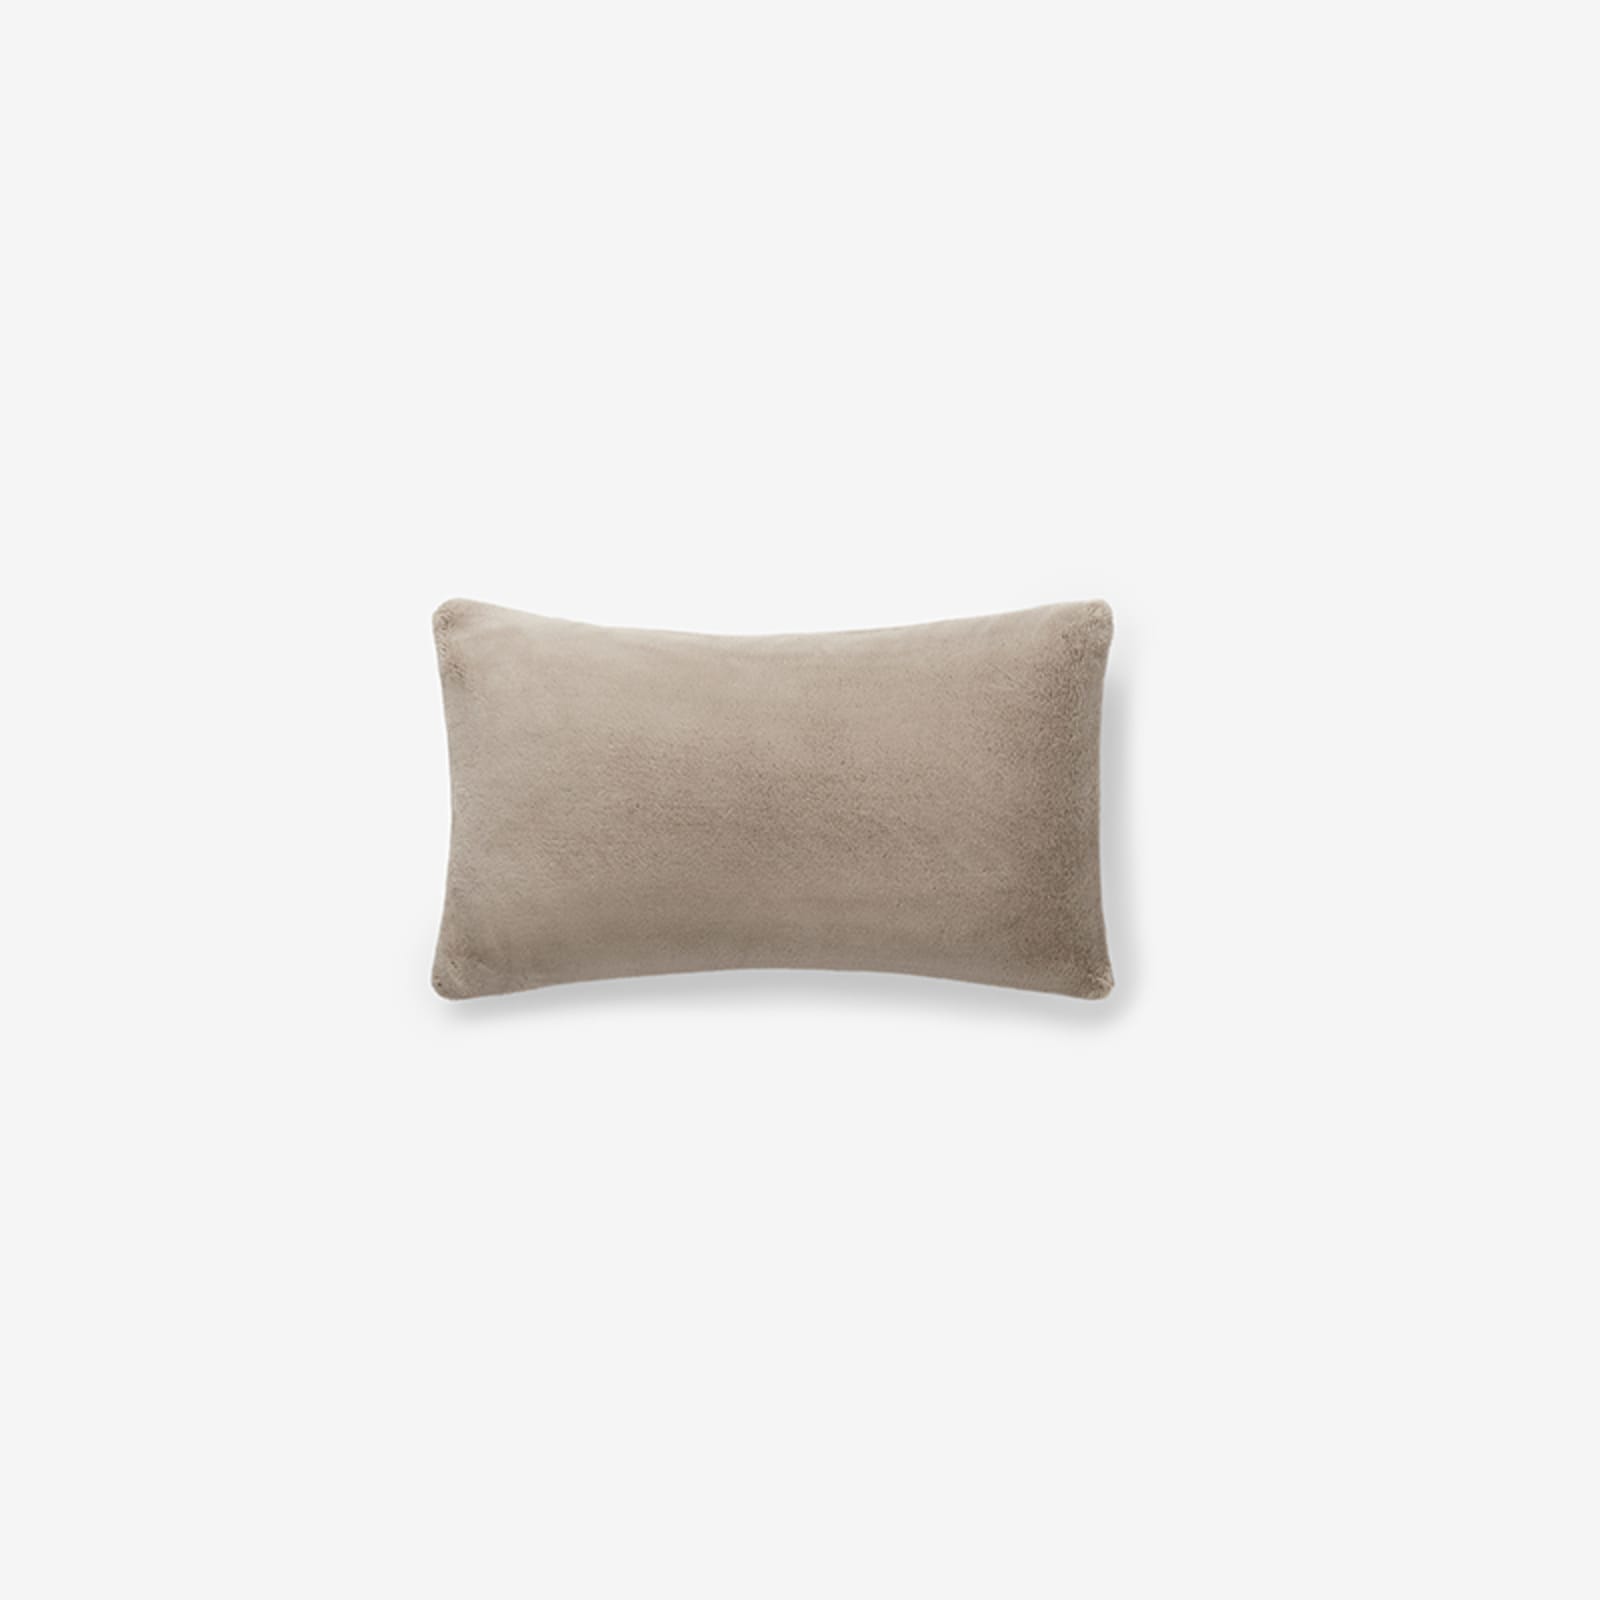 Decorative Pillow Cover | The Company Store